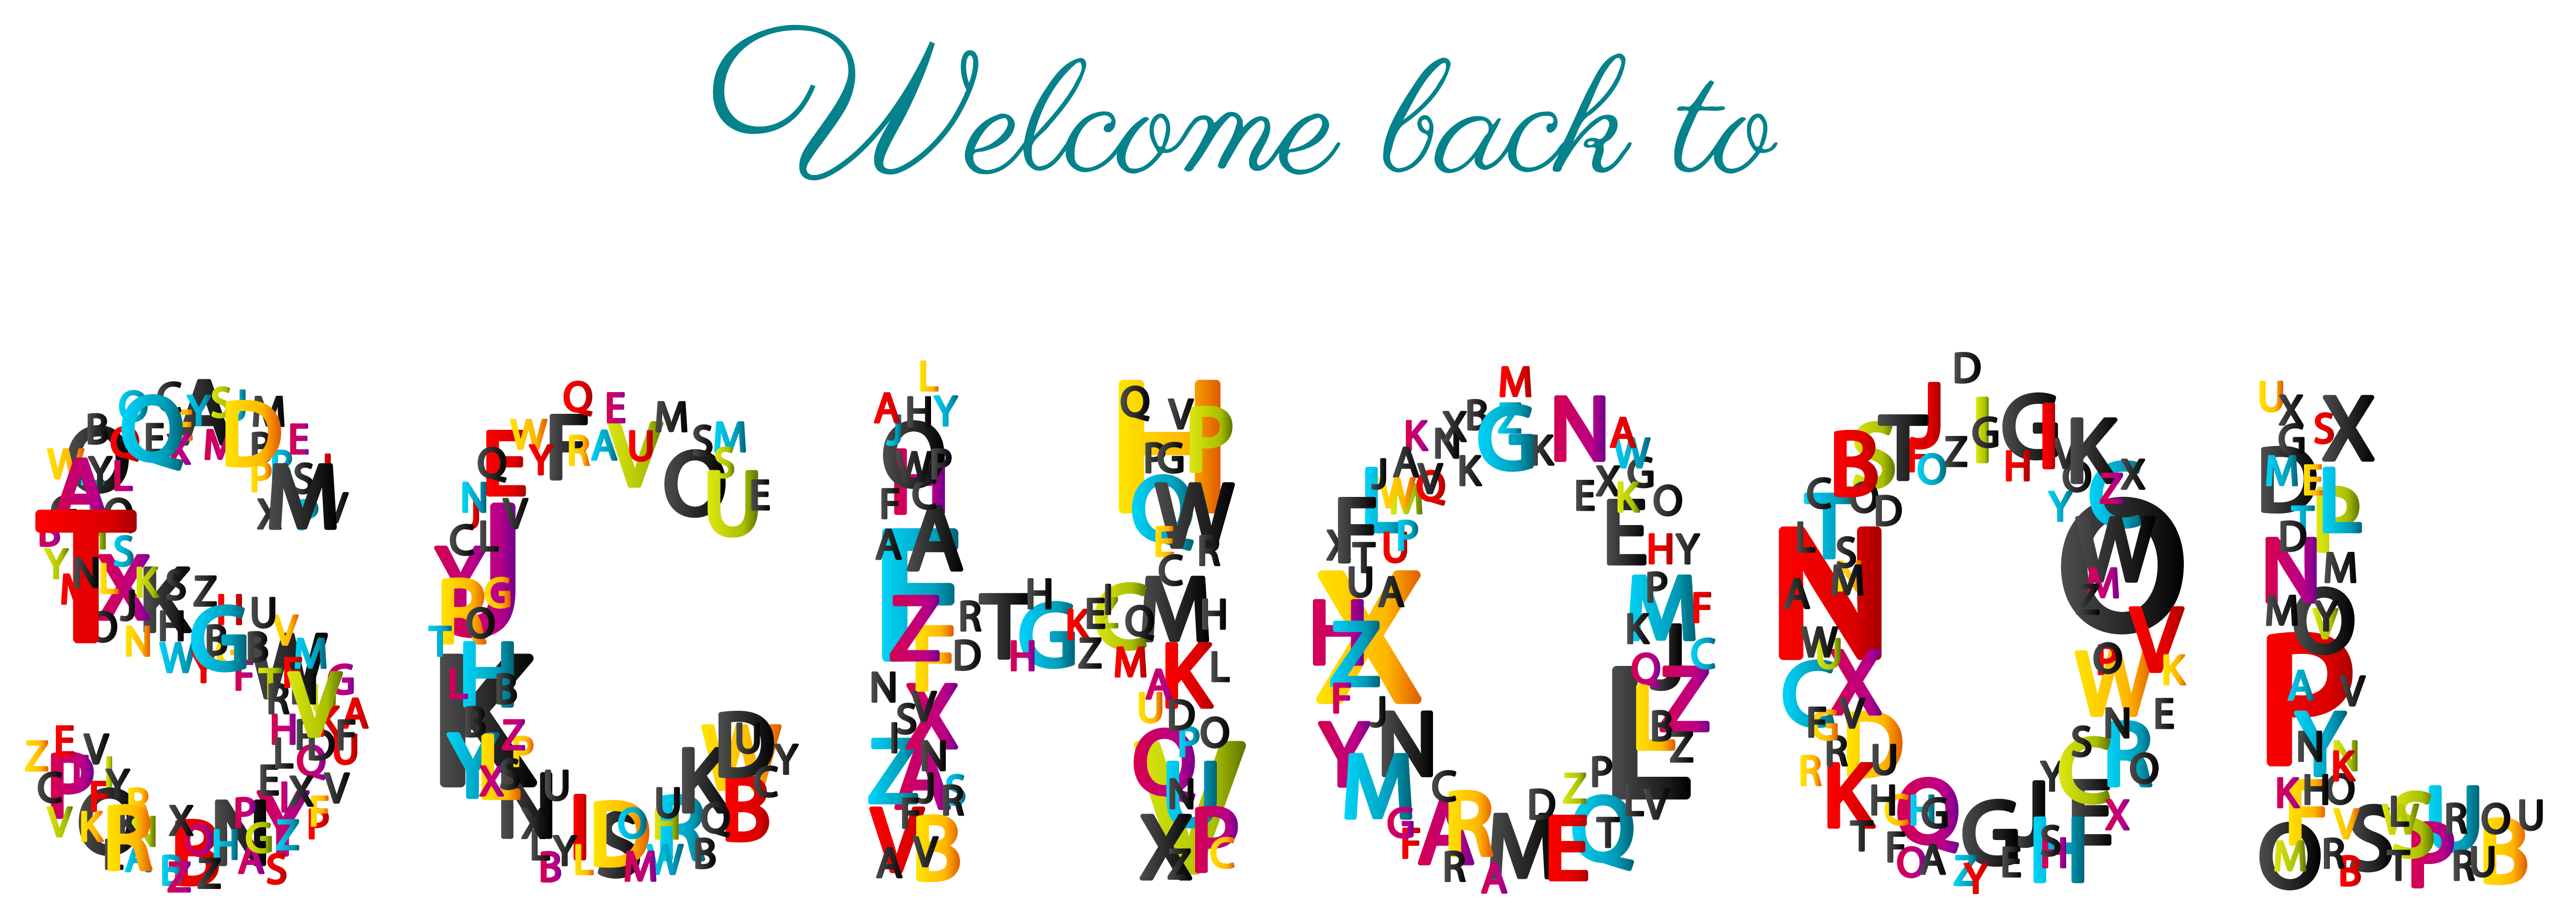 Welcome Back to School PNG Clipart Picture 